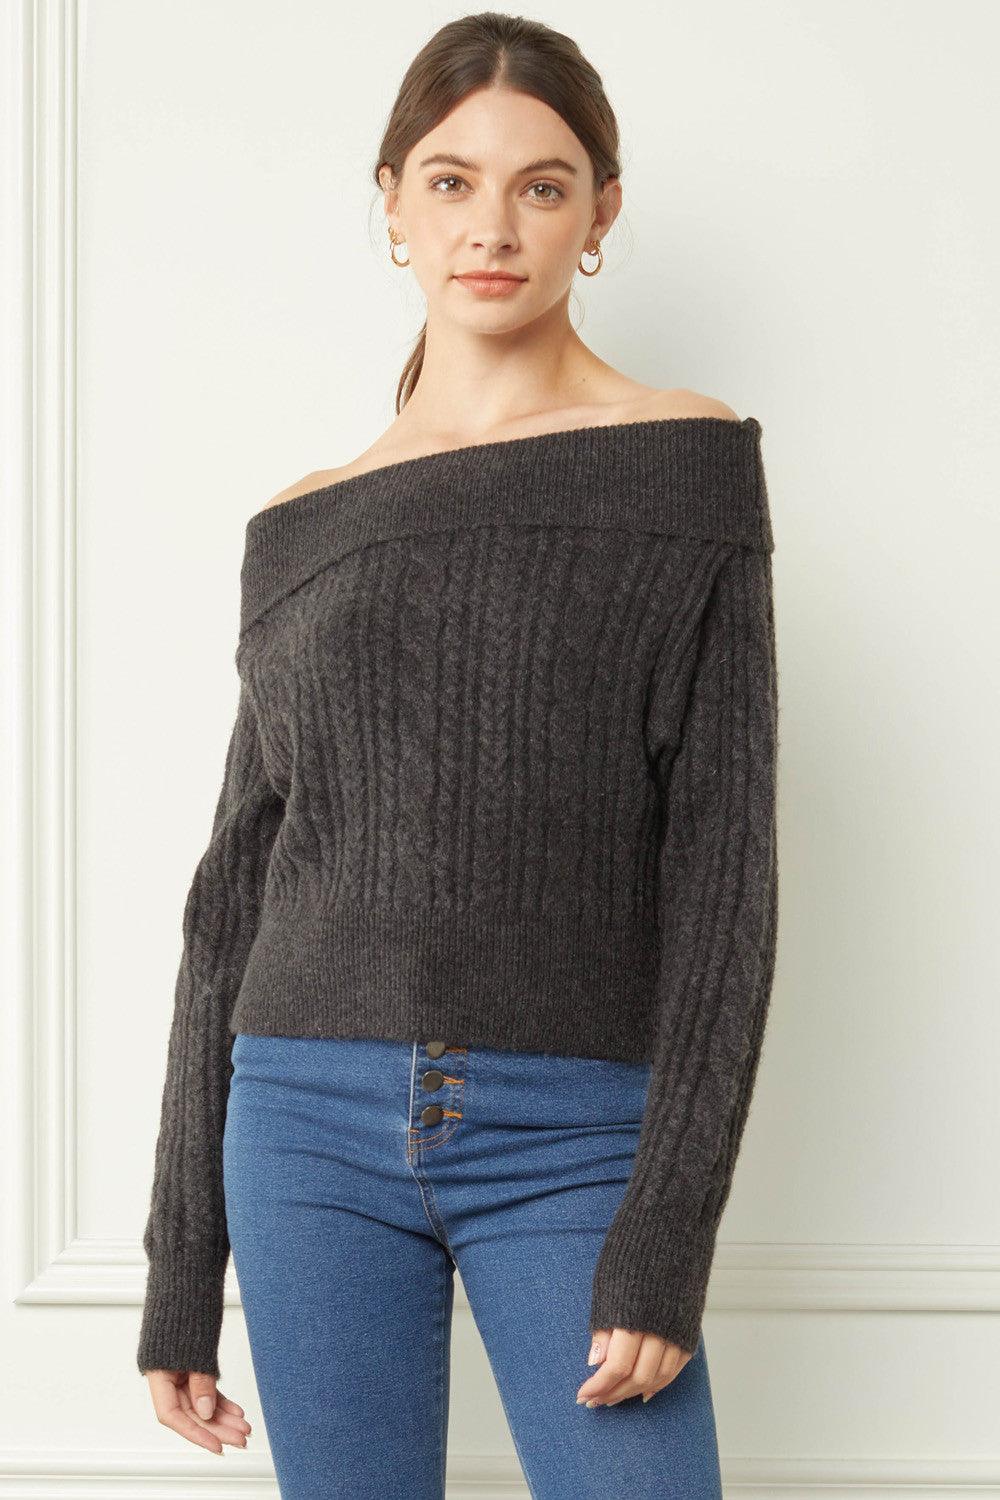 off the shoulder cable knit sweater-Tops-Sweater-Entro-Ash Black-T16970-4-RK Collections Boutique